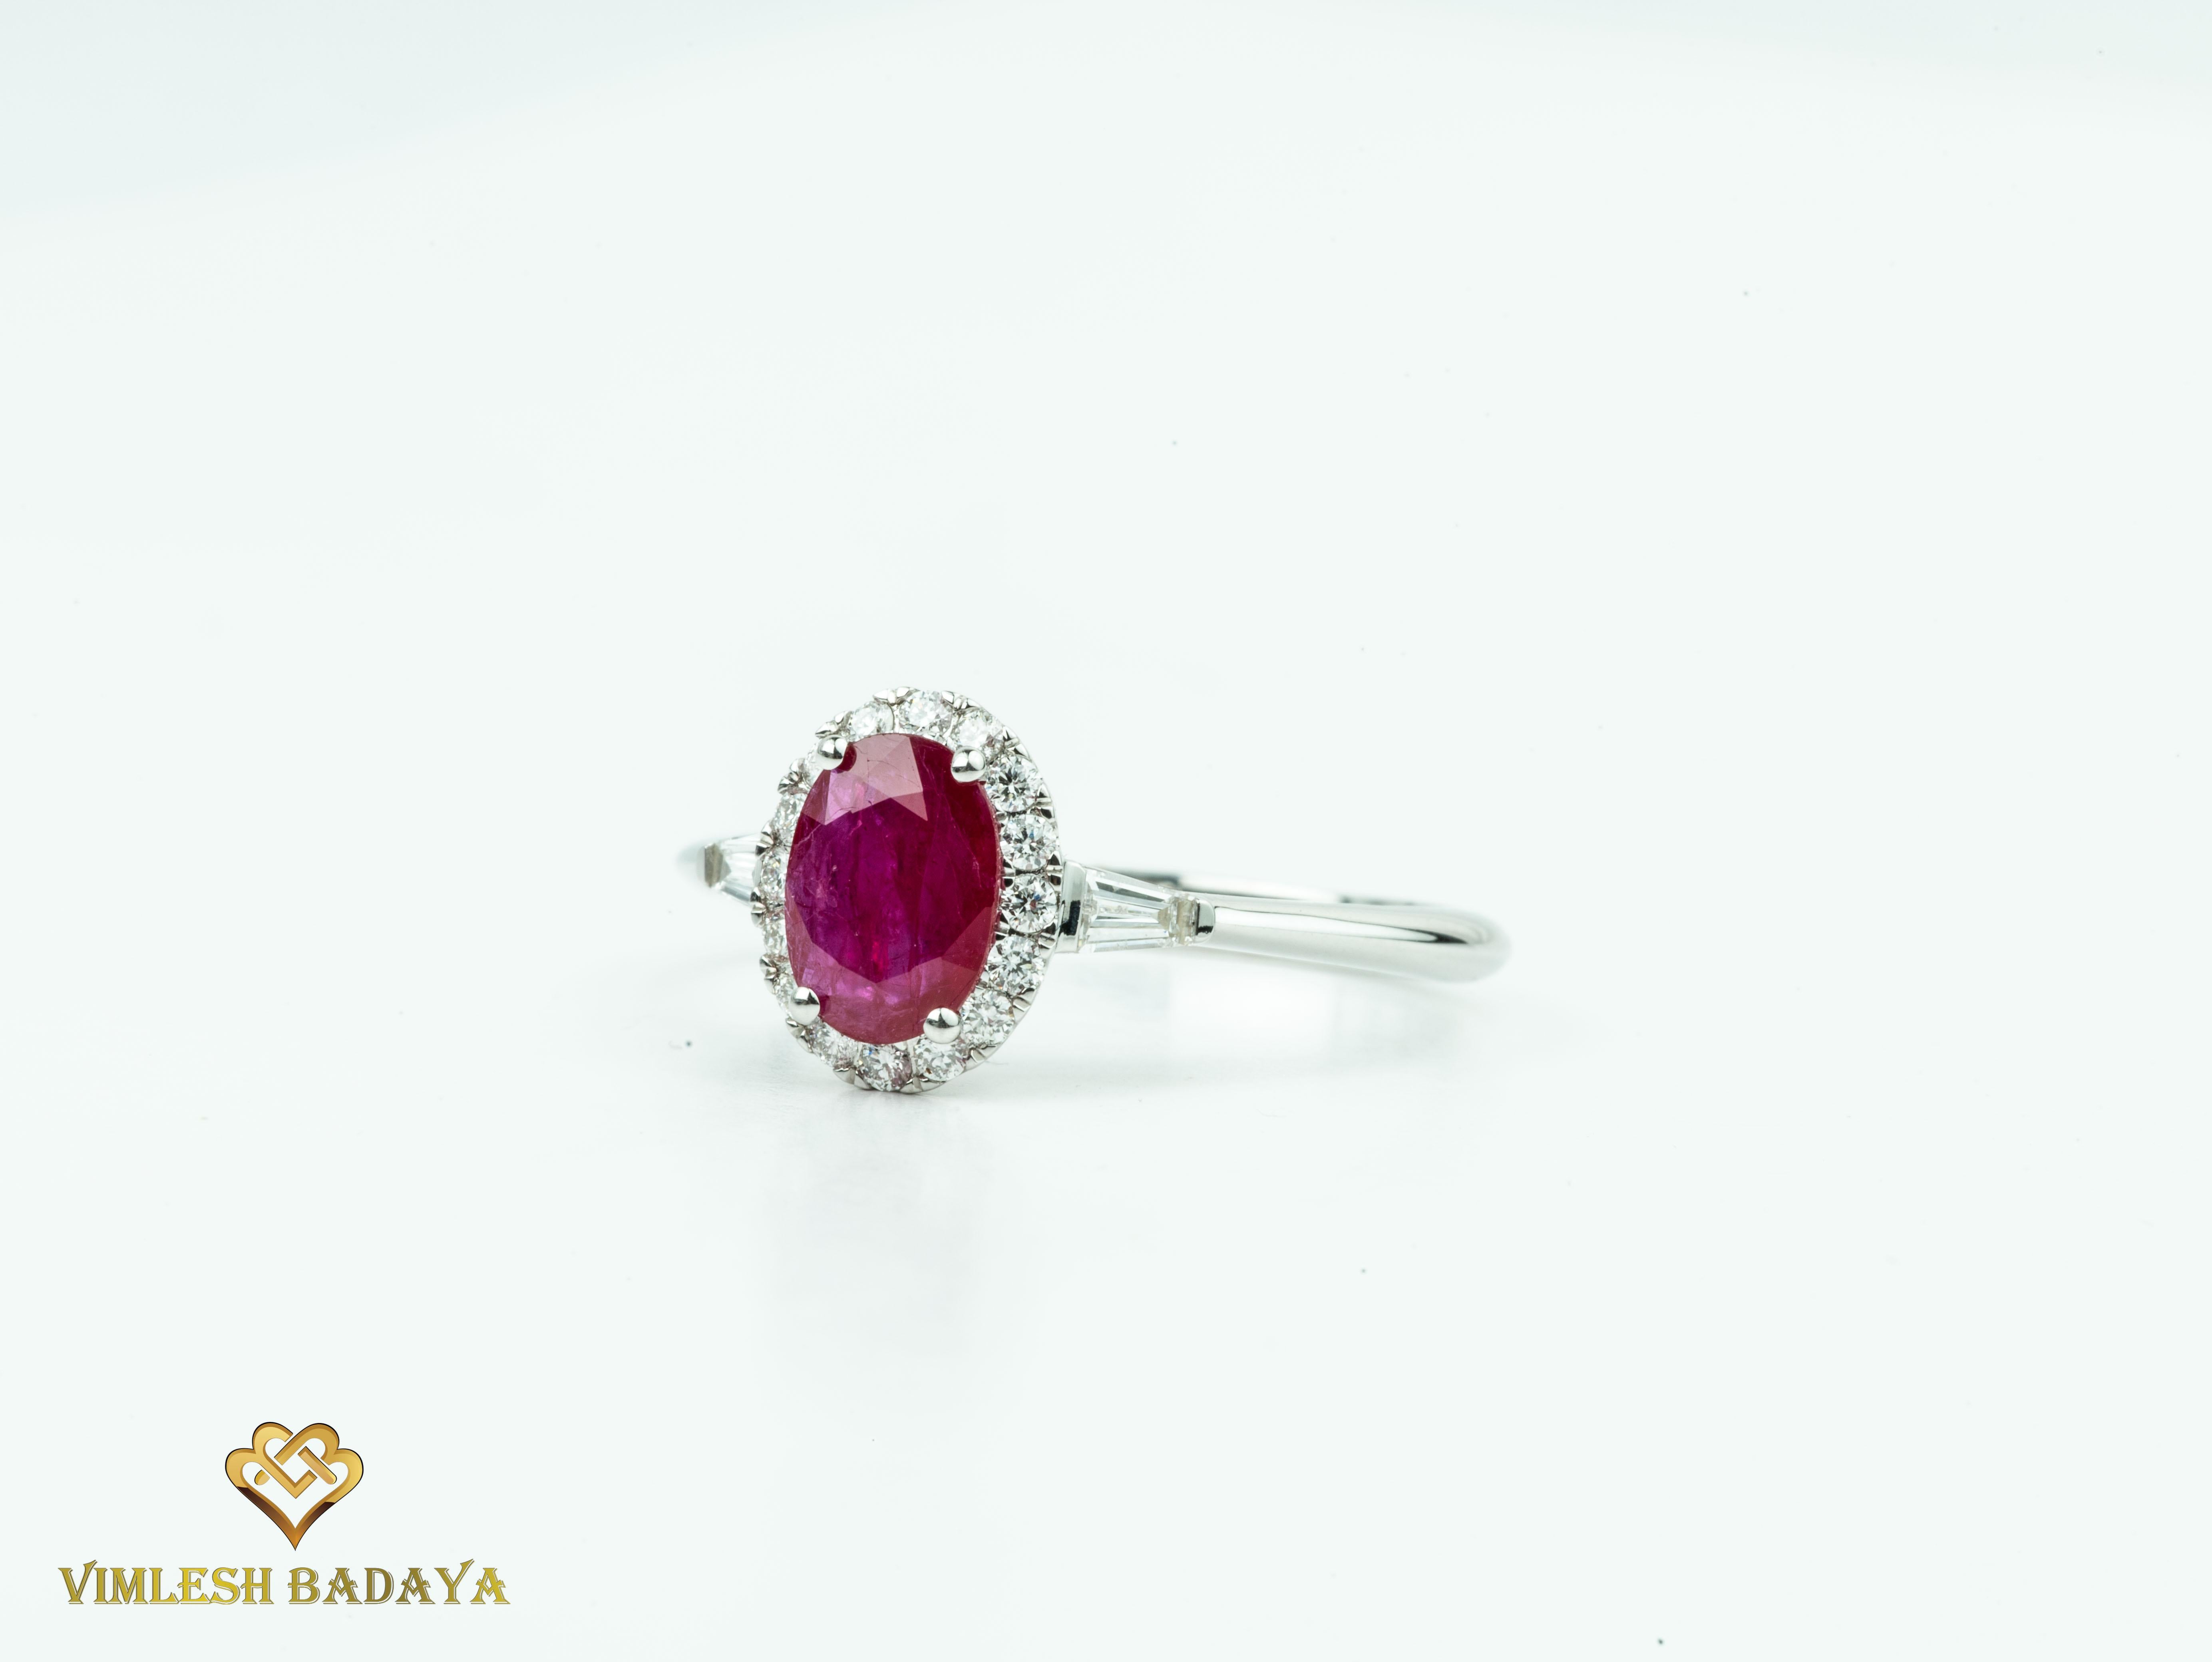 Oval Ruby Diamond Tapper Baguette Round Cut Double Halo Engagement Ring

Available in 18k white gold.

Same design can be made also with other custom gemstones per request.

Product details:

- Solid gold

- Diamond - approx. 0.23 carat

- Ruby -